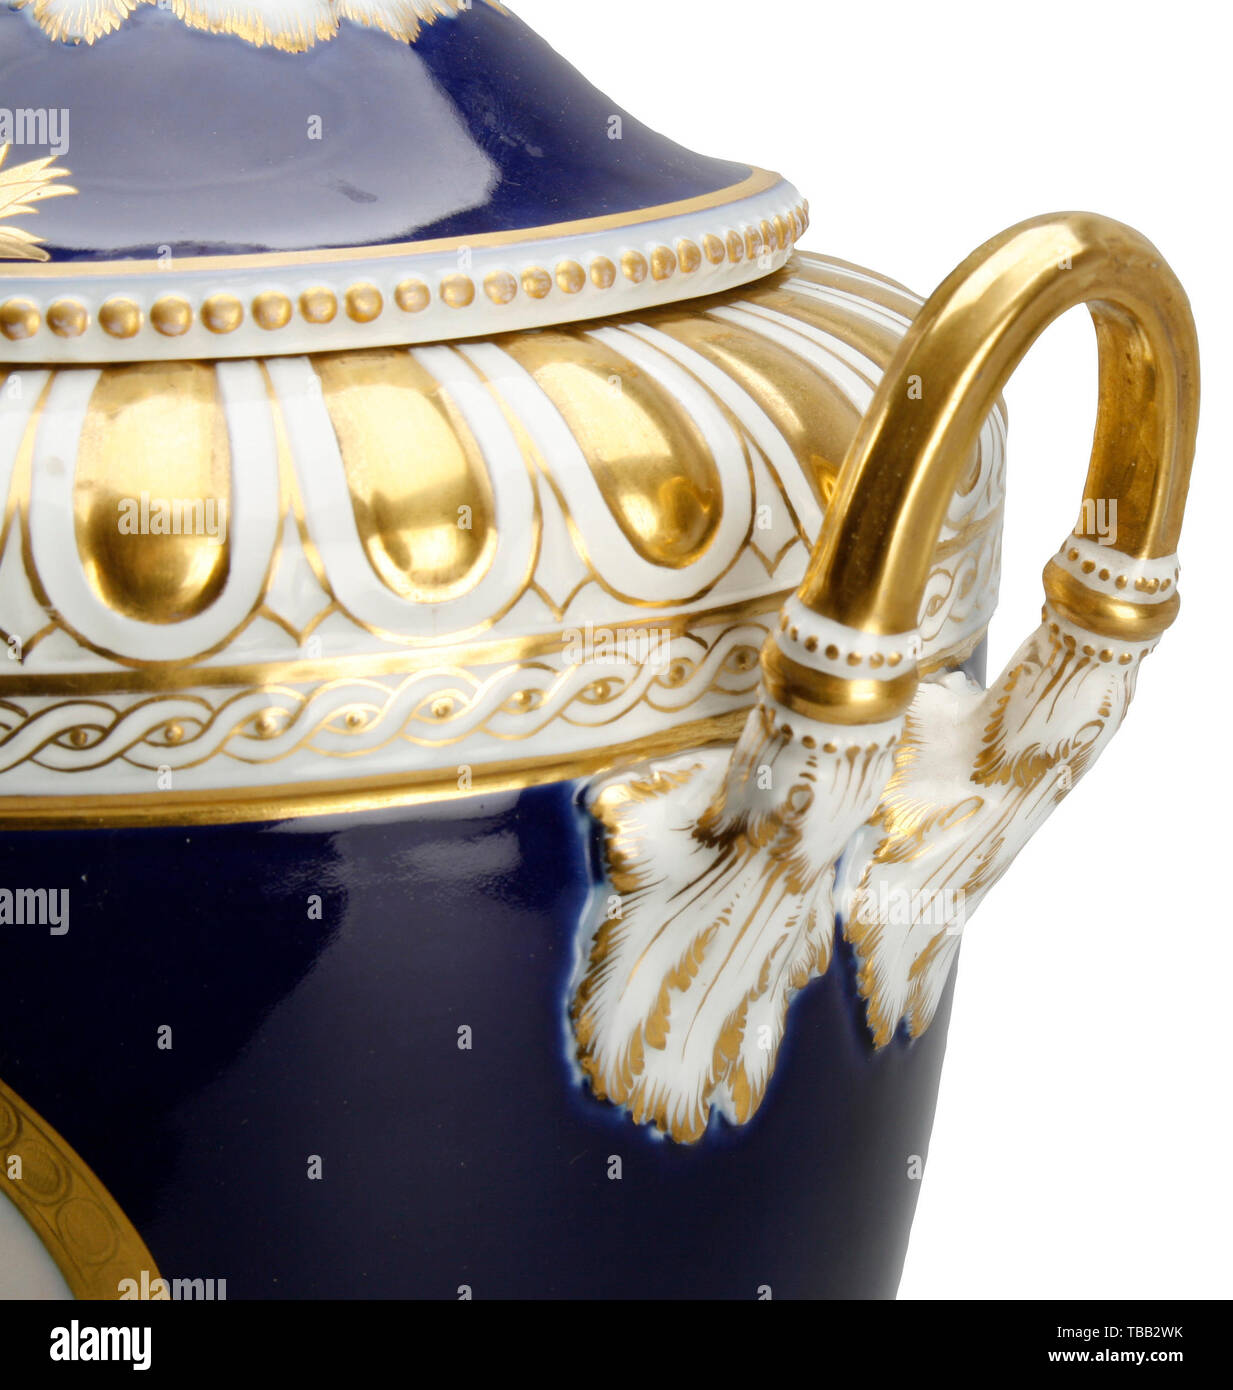 Wilhelm I King of Prussia - a gift vase with lid The vase with city views of Berlin. Cobalt blue background and rich bright gilding. On the exterior two images within gold frames, depicting the equestrian statue of Friedrich II by C.D. Rauch and the Wilhelm Palais Unter den Linden. Associated blue lid with white-gold cones and gold royal crown on both sides. Blue sceptre and penny mark, red orb and gilder's mark. Height 43 cm. KPM mark, Berlin circa 1870. Decorative. Pre-auction viewing in Northern Germany after prior appointment with Hermann His, Additional-Rights-Clearance-Info-Not-Available Stock Photo